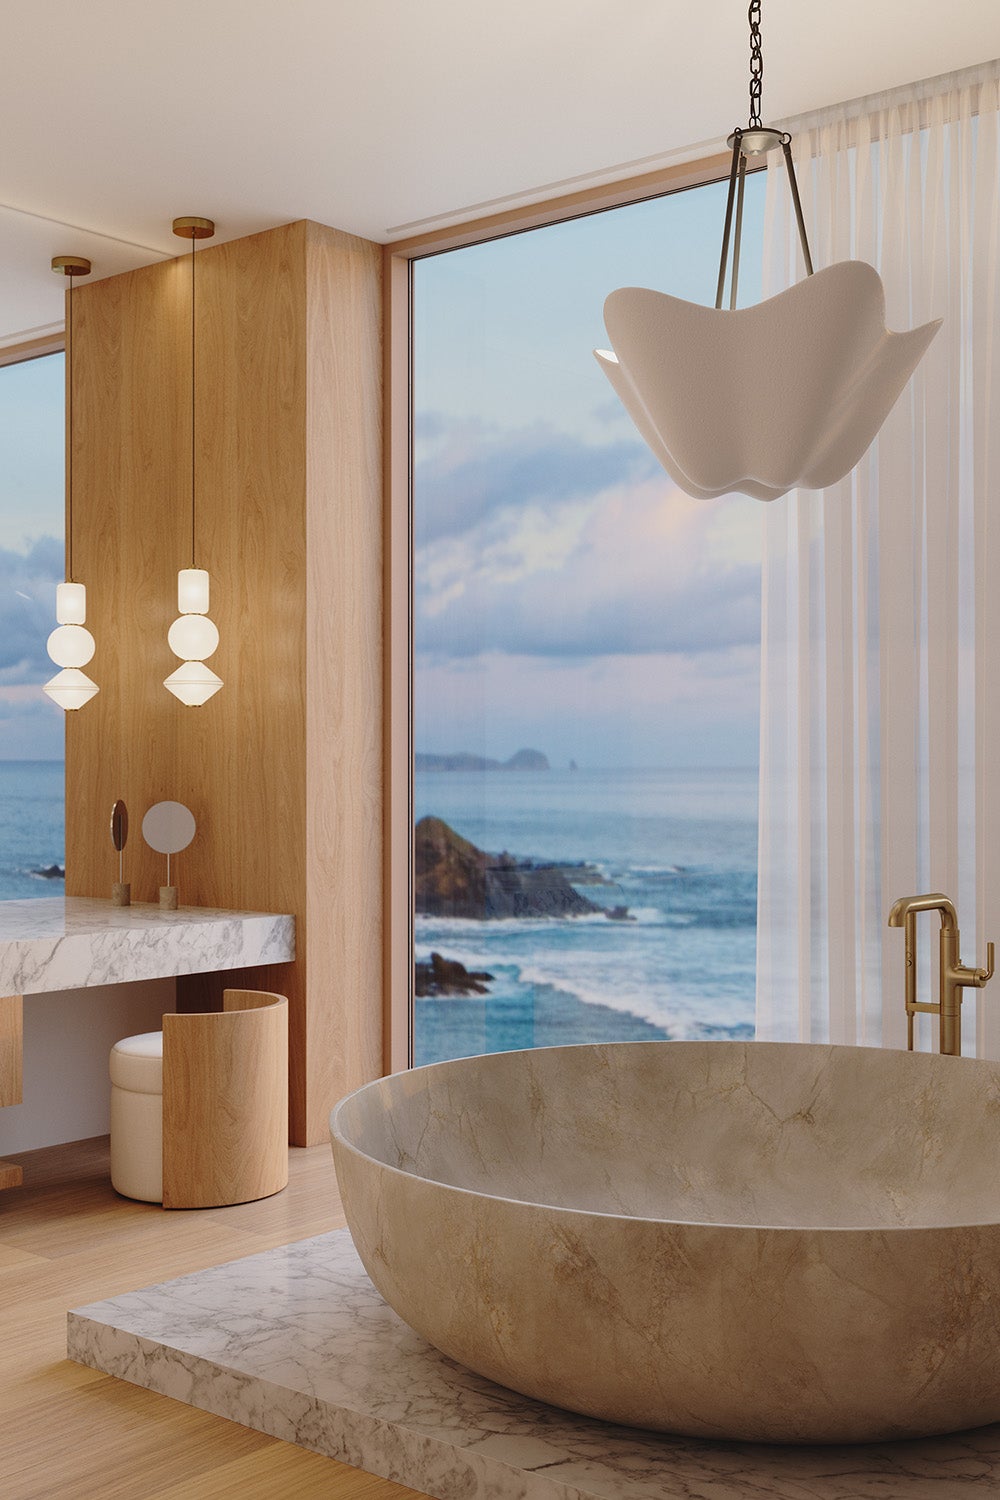 This Stunning Bath Designed by Victoria Tonelli is a Modern Retreat